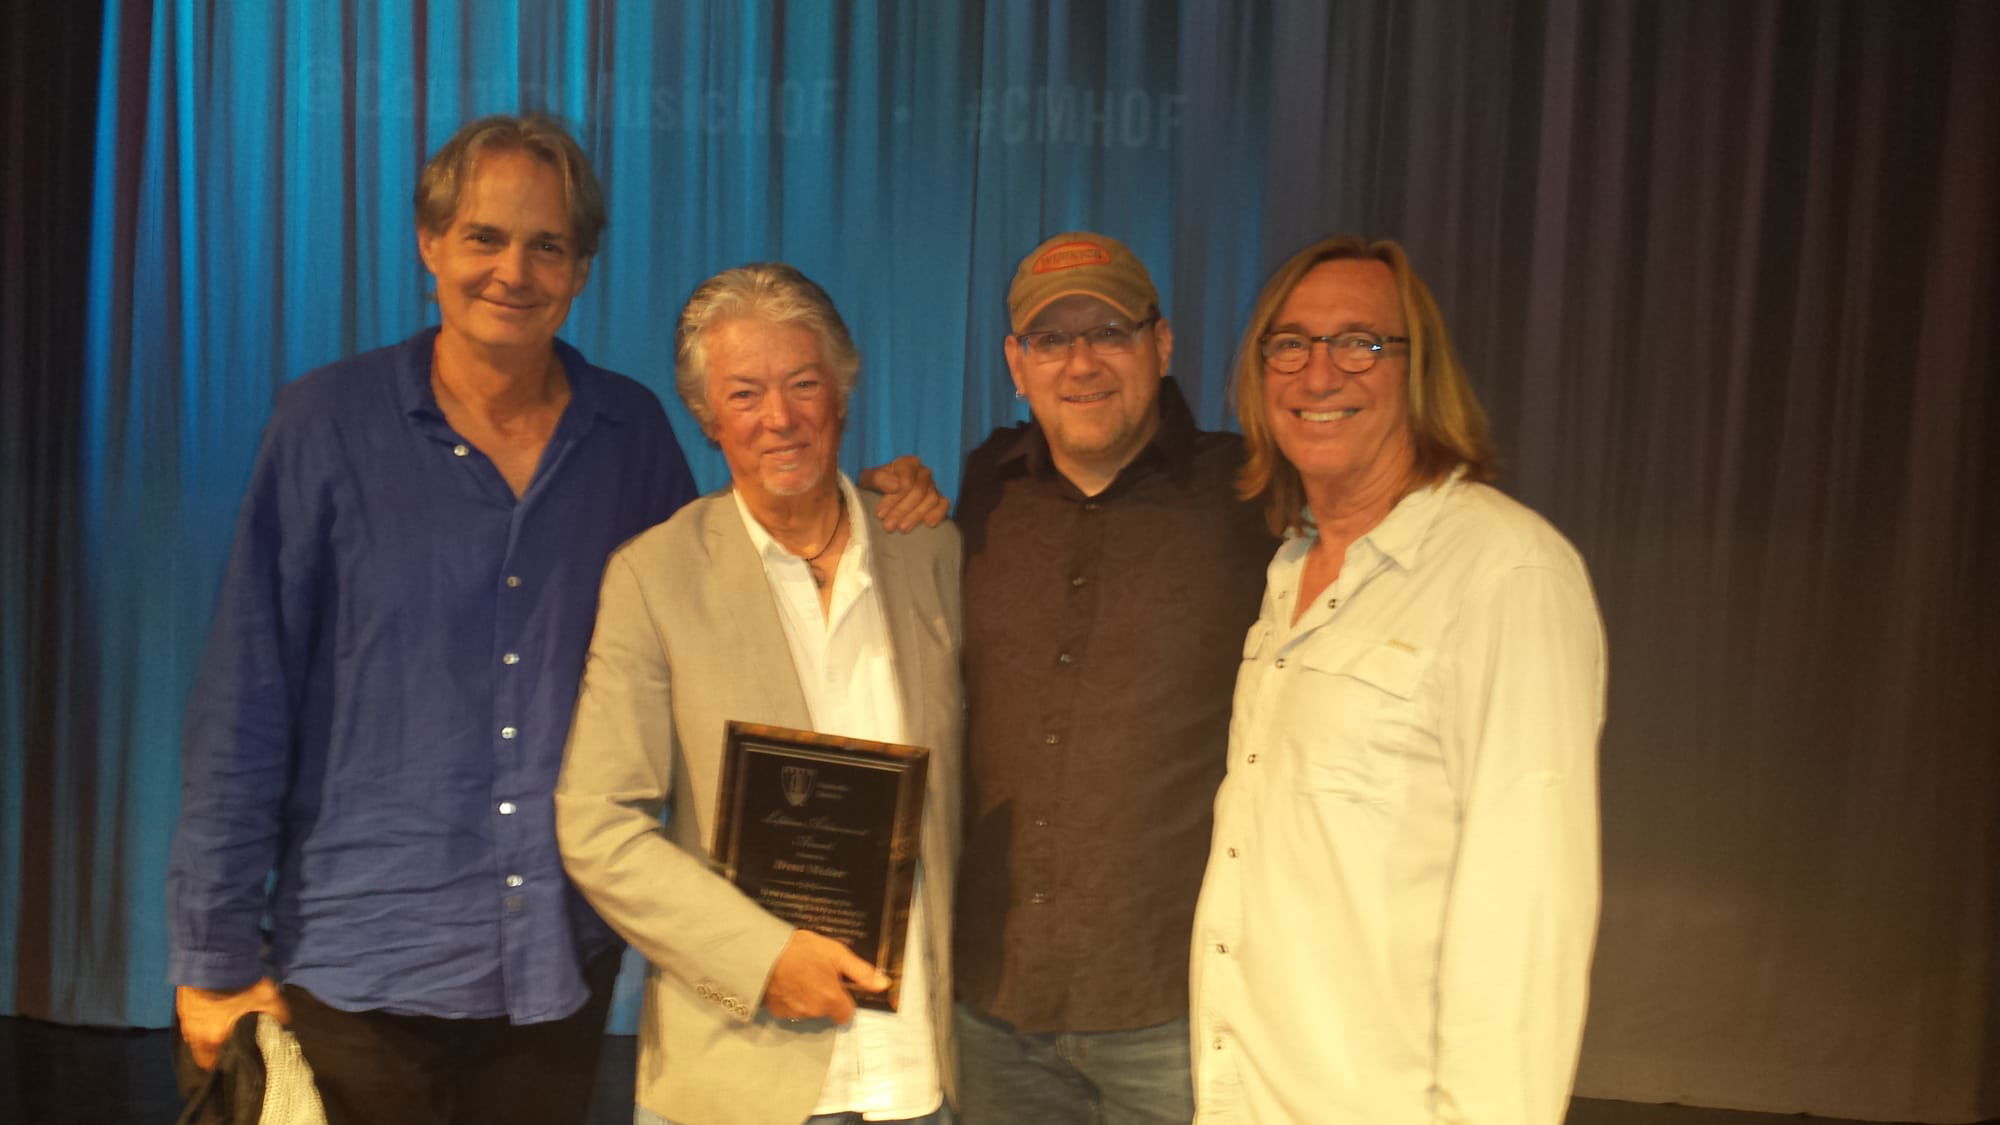 AES Awards Show in Nashville Hall of Fame. L_R Glenn Worf ("A" Session Bass), Producer Brent Mayer, & producer Chuck Ainley